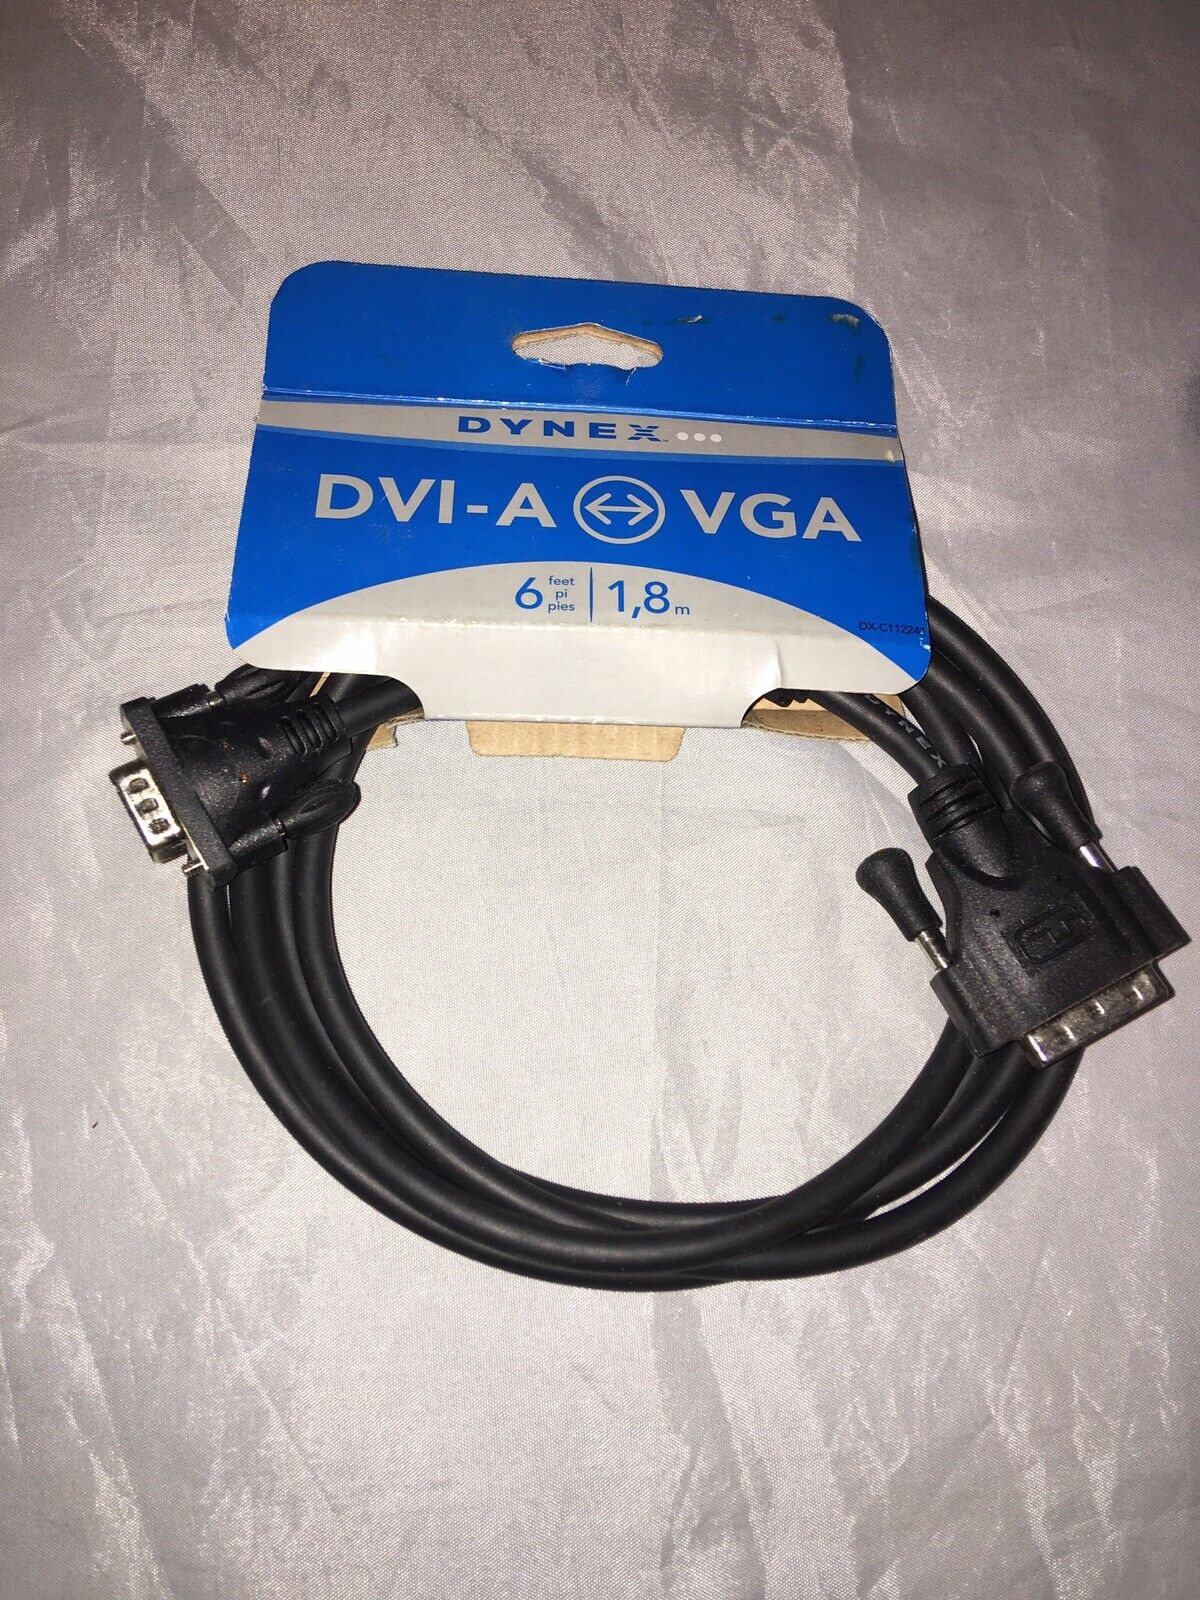  Dynex DX-C112241 DVI-A to VGA Cable Male to Male Connects Computer To Monitor